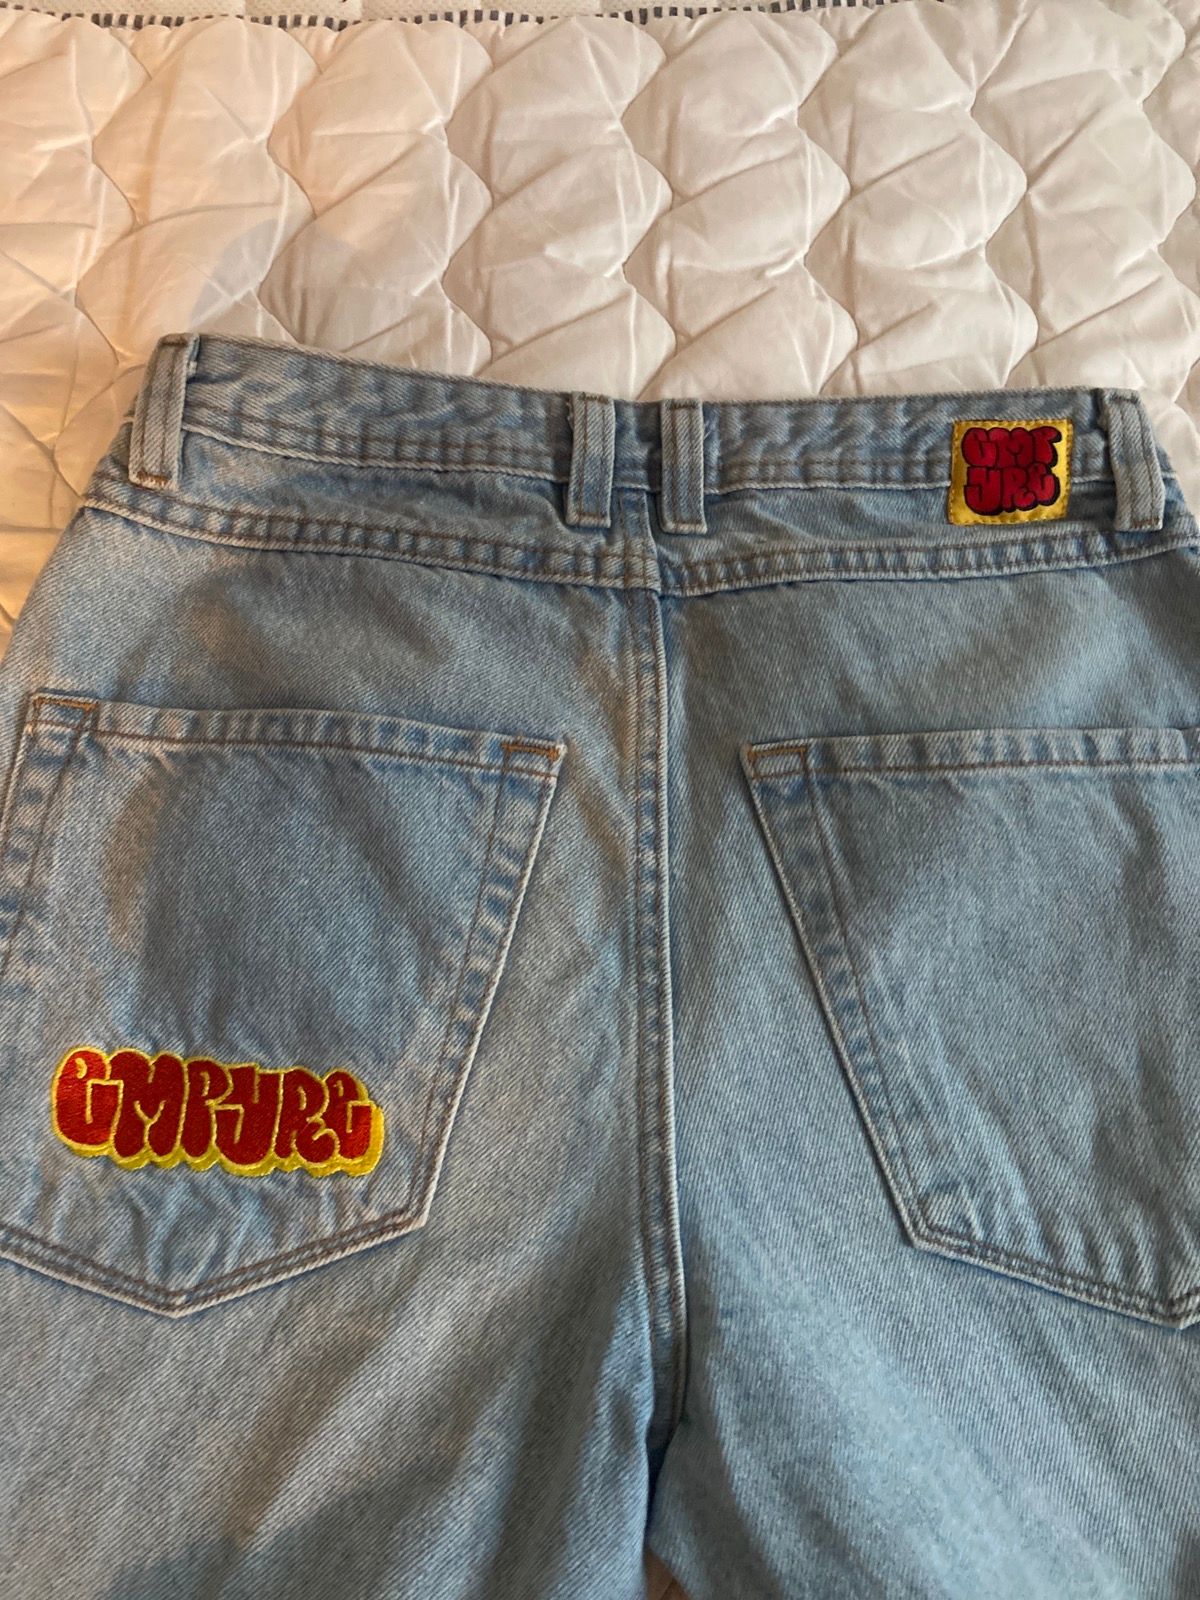 Empyre Baggy skate jeans | Grailed